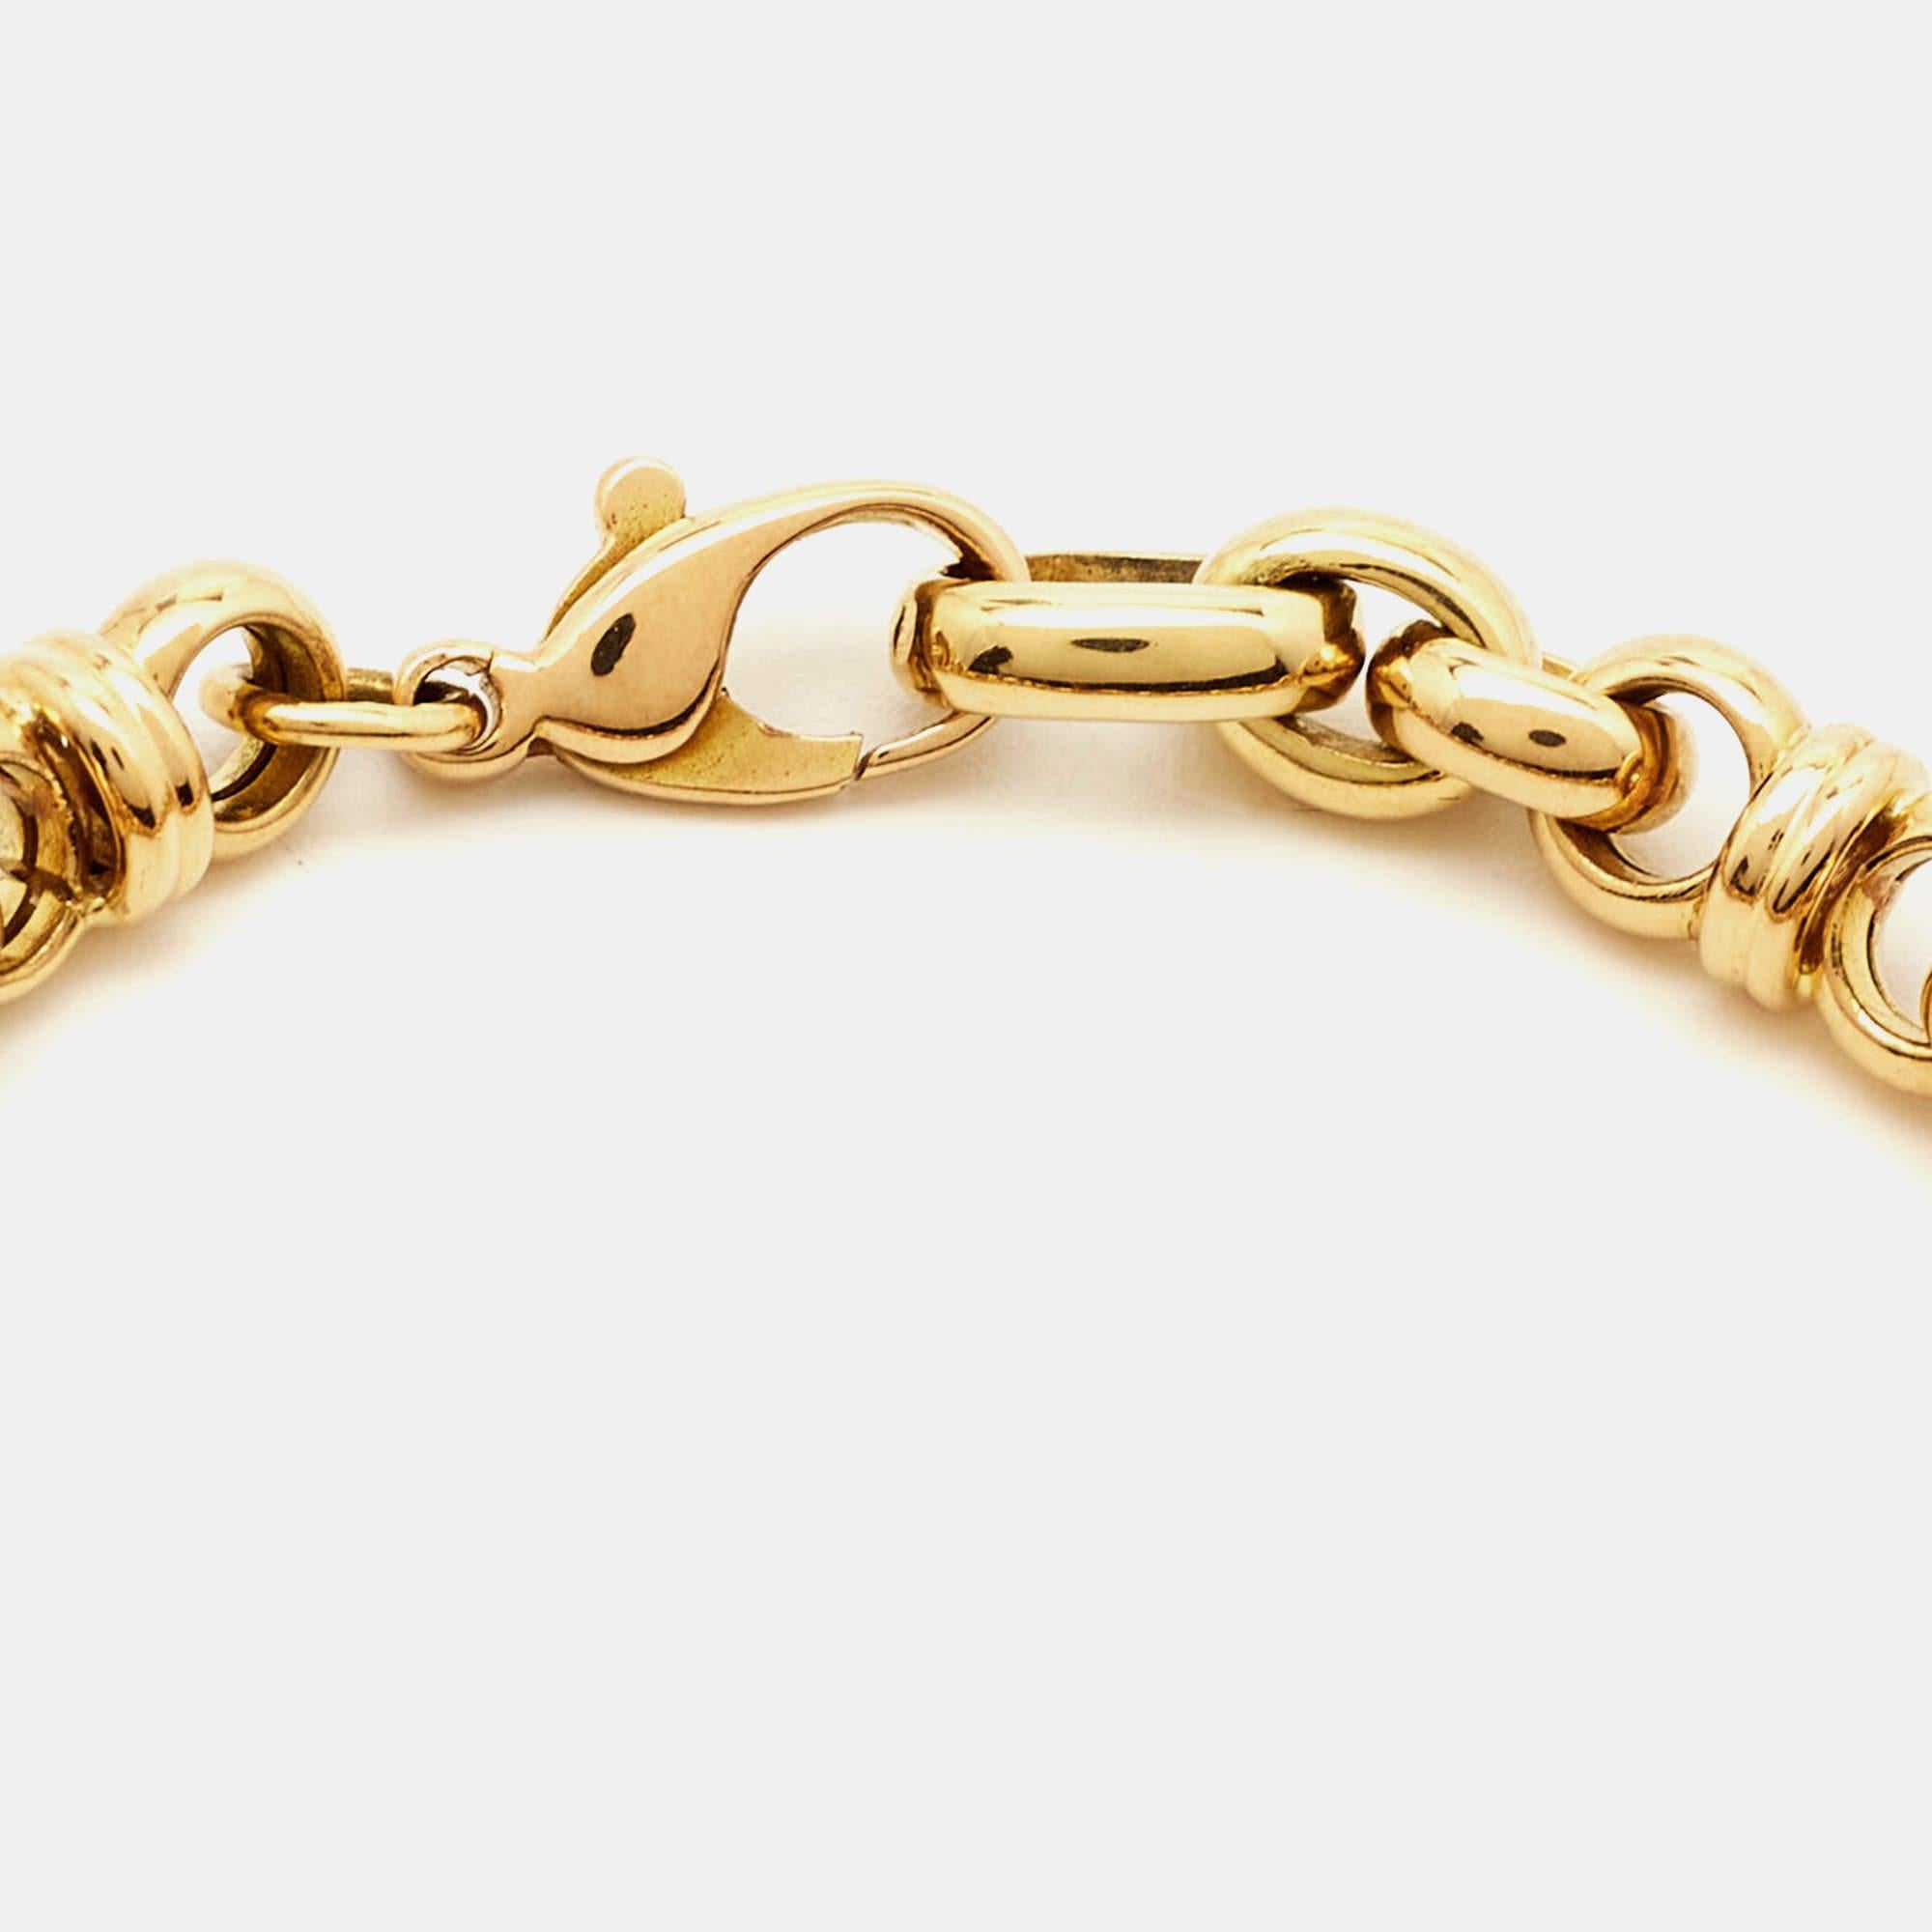 A symbol of timeless beauty by Chopard in the form of this precious bracelet from the Happy Diamond collection. Formed using 18k yellow gold, the bracelet has dangling charms that say 'I Love You'. Three dancing diamonds are applied to create the